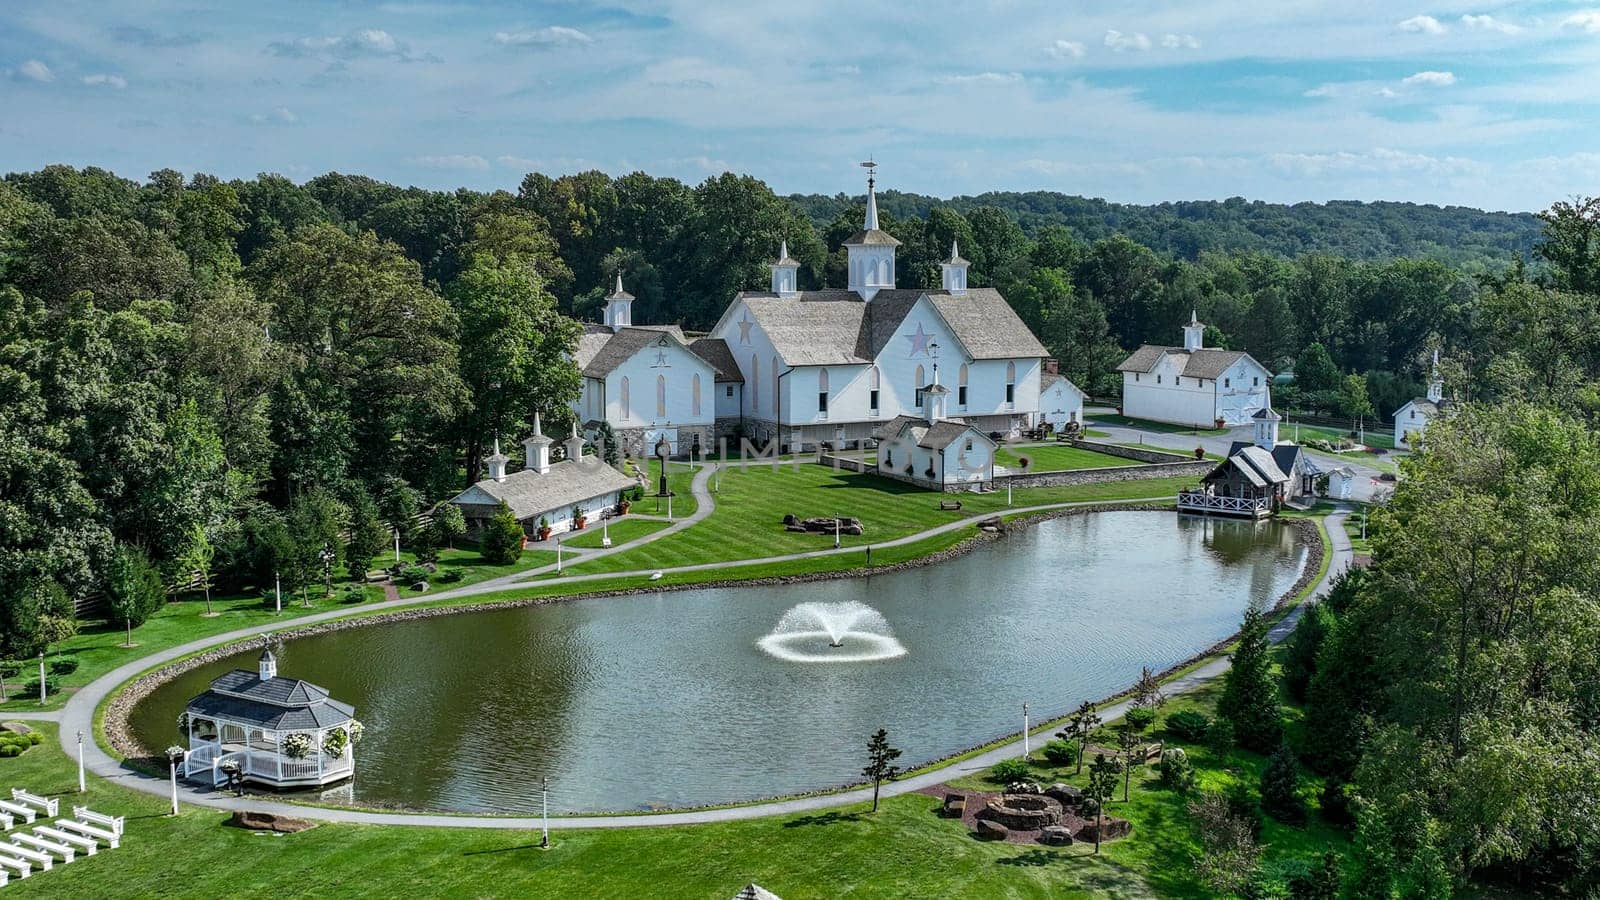 Elizabethtown, Pennsylvania, USA, August 11, 2023 - Aerial View Showcasing A Cluster Of Traditional White Orthodox Churches With Cross-Topped Domes, Arranged Around A Curved Pond With A Fountain, Amidst Green Trees And Neatly Arranged White Benches